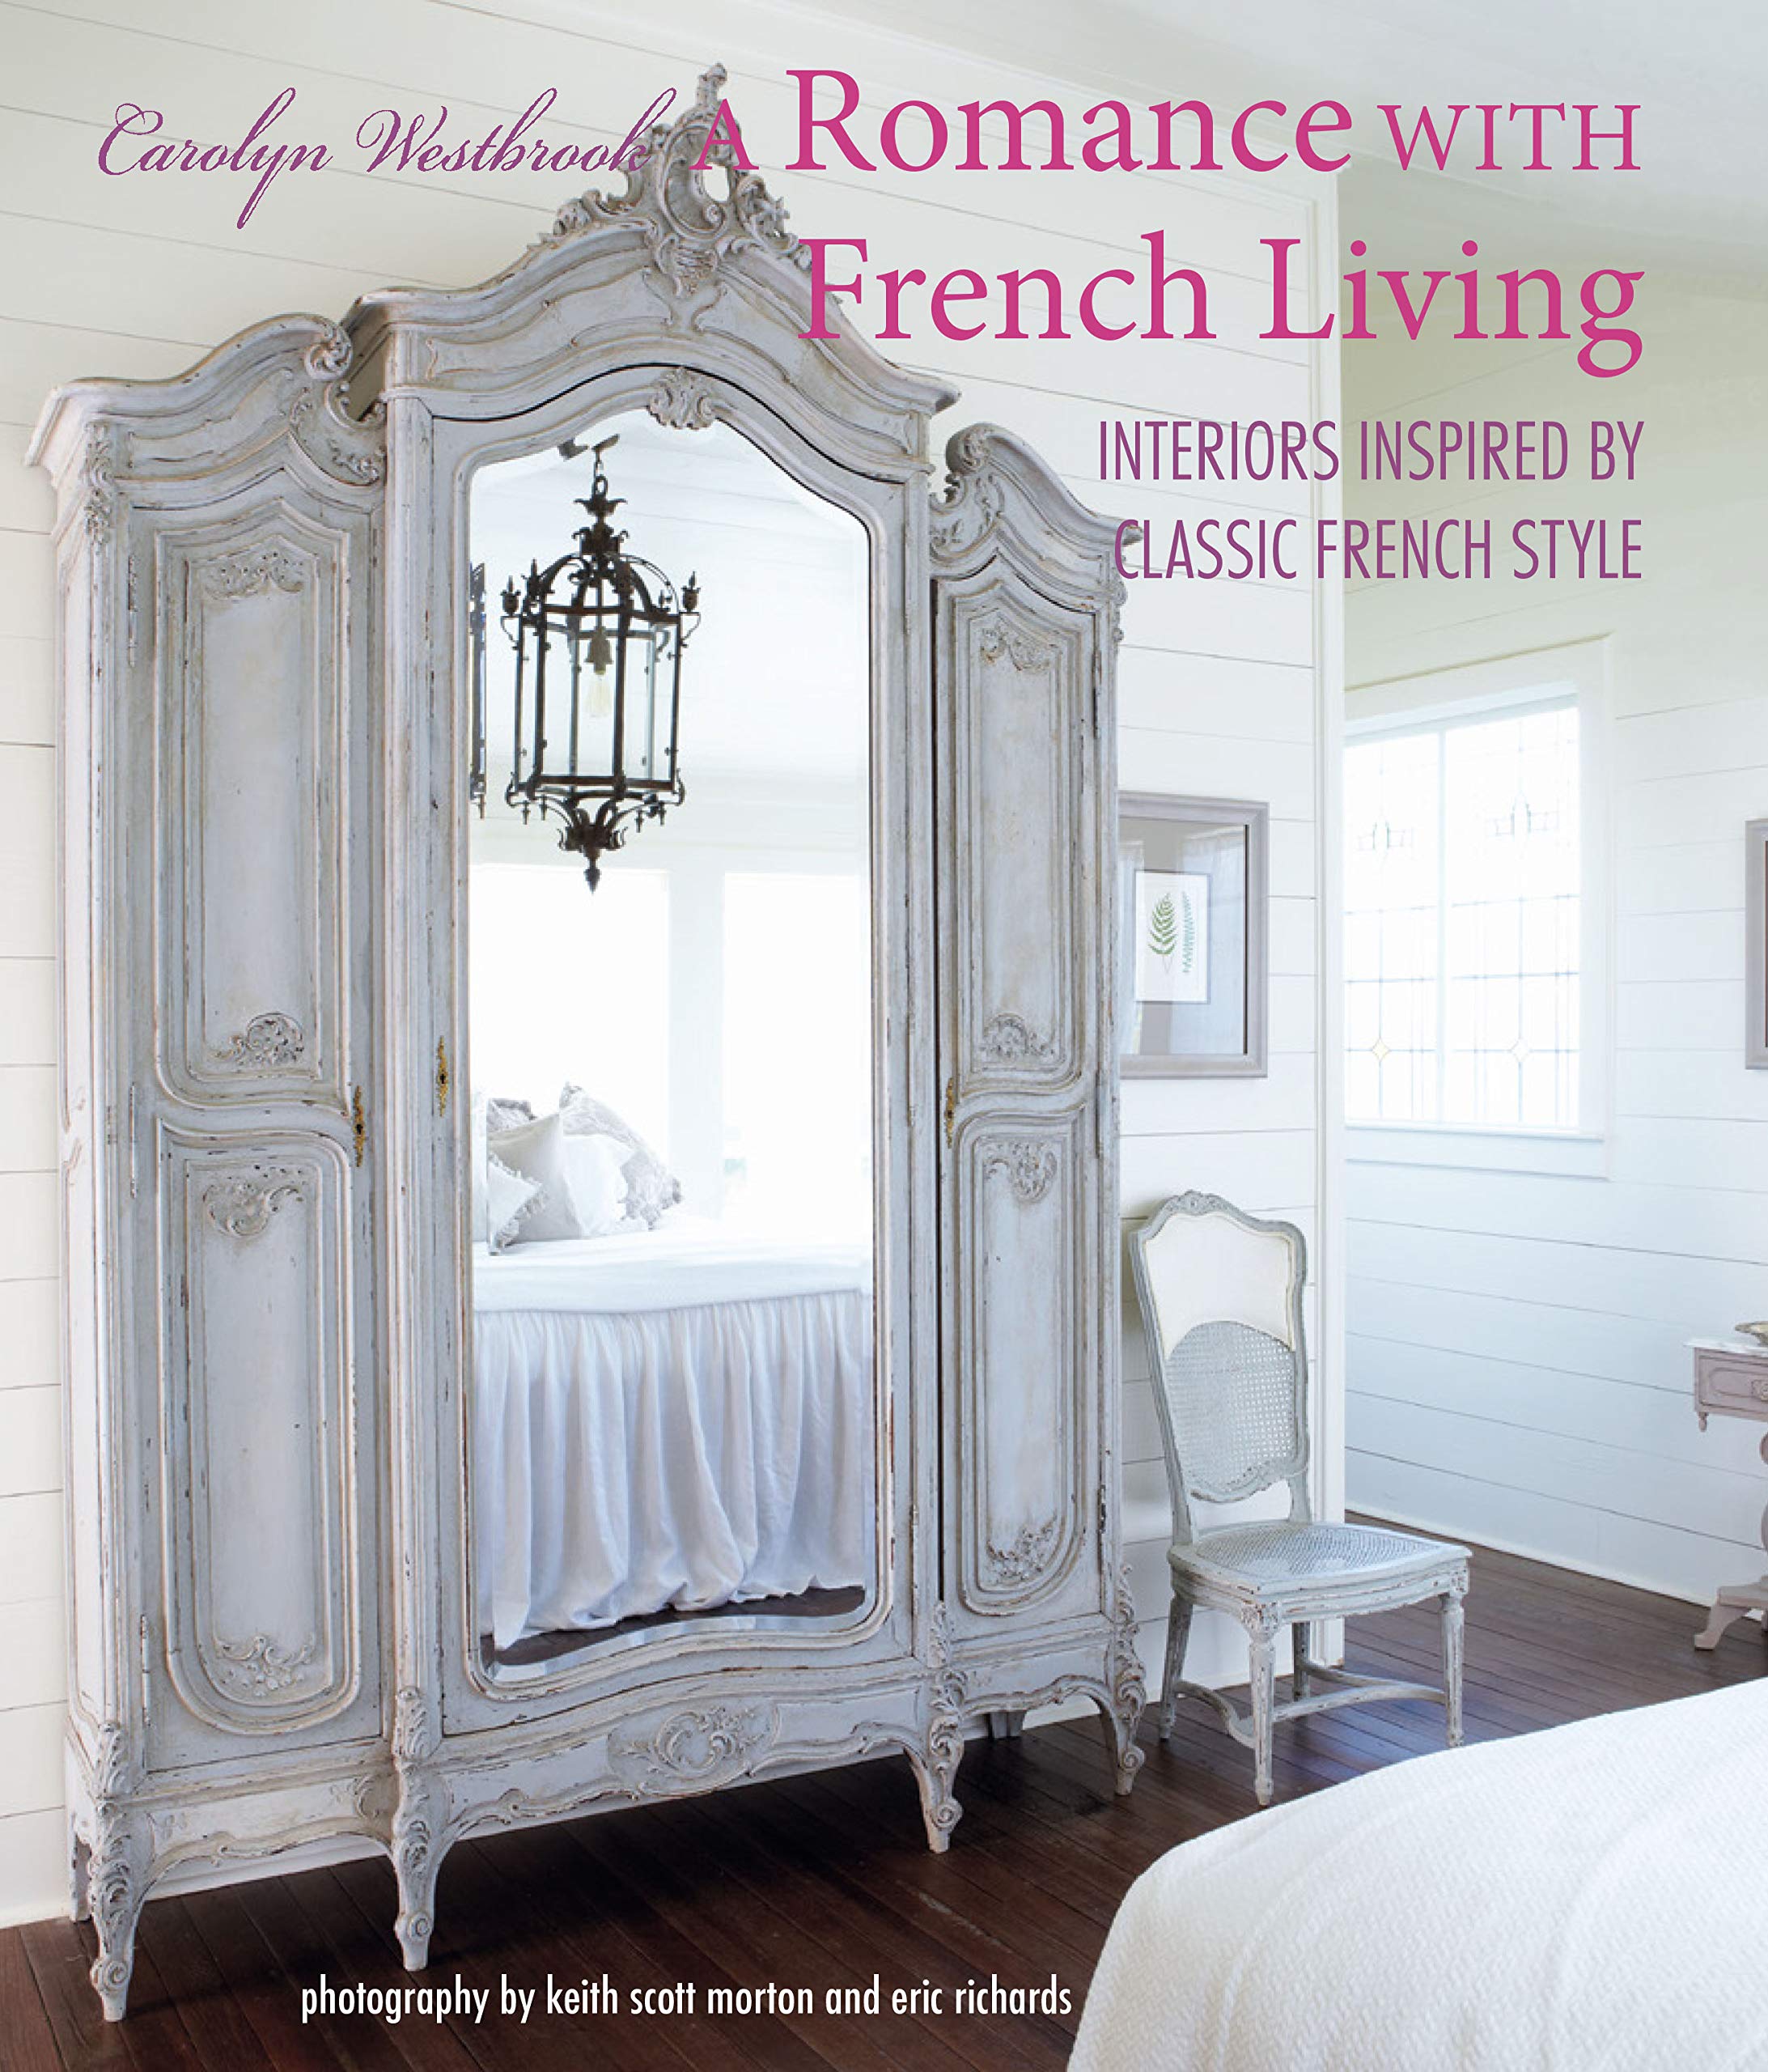 A Romance With French Living | Carolyn Westbrook